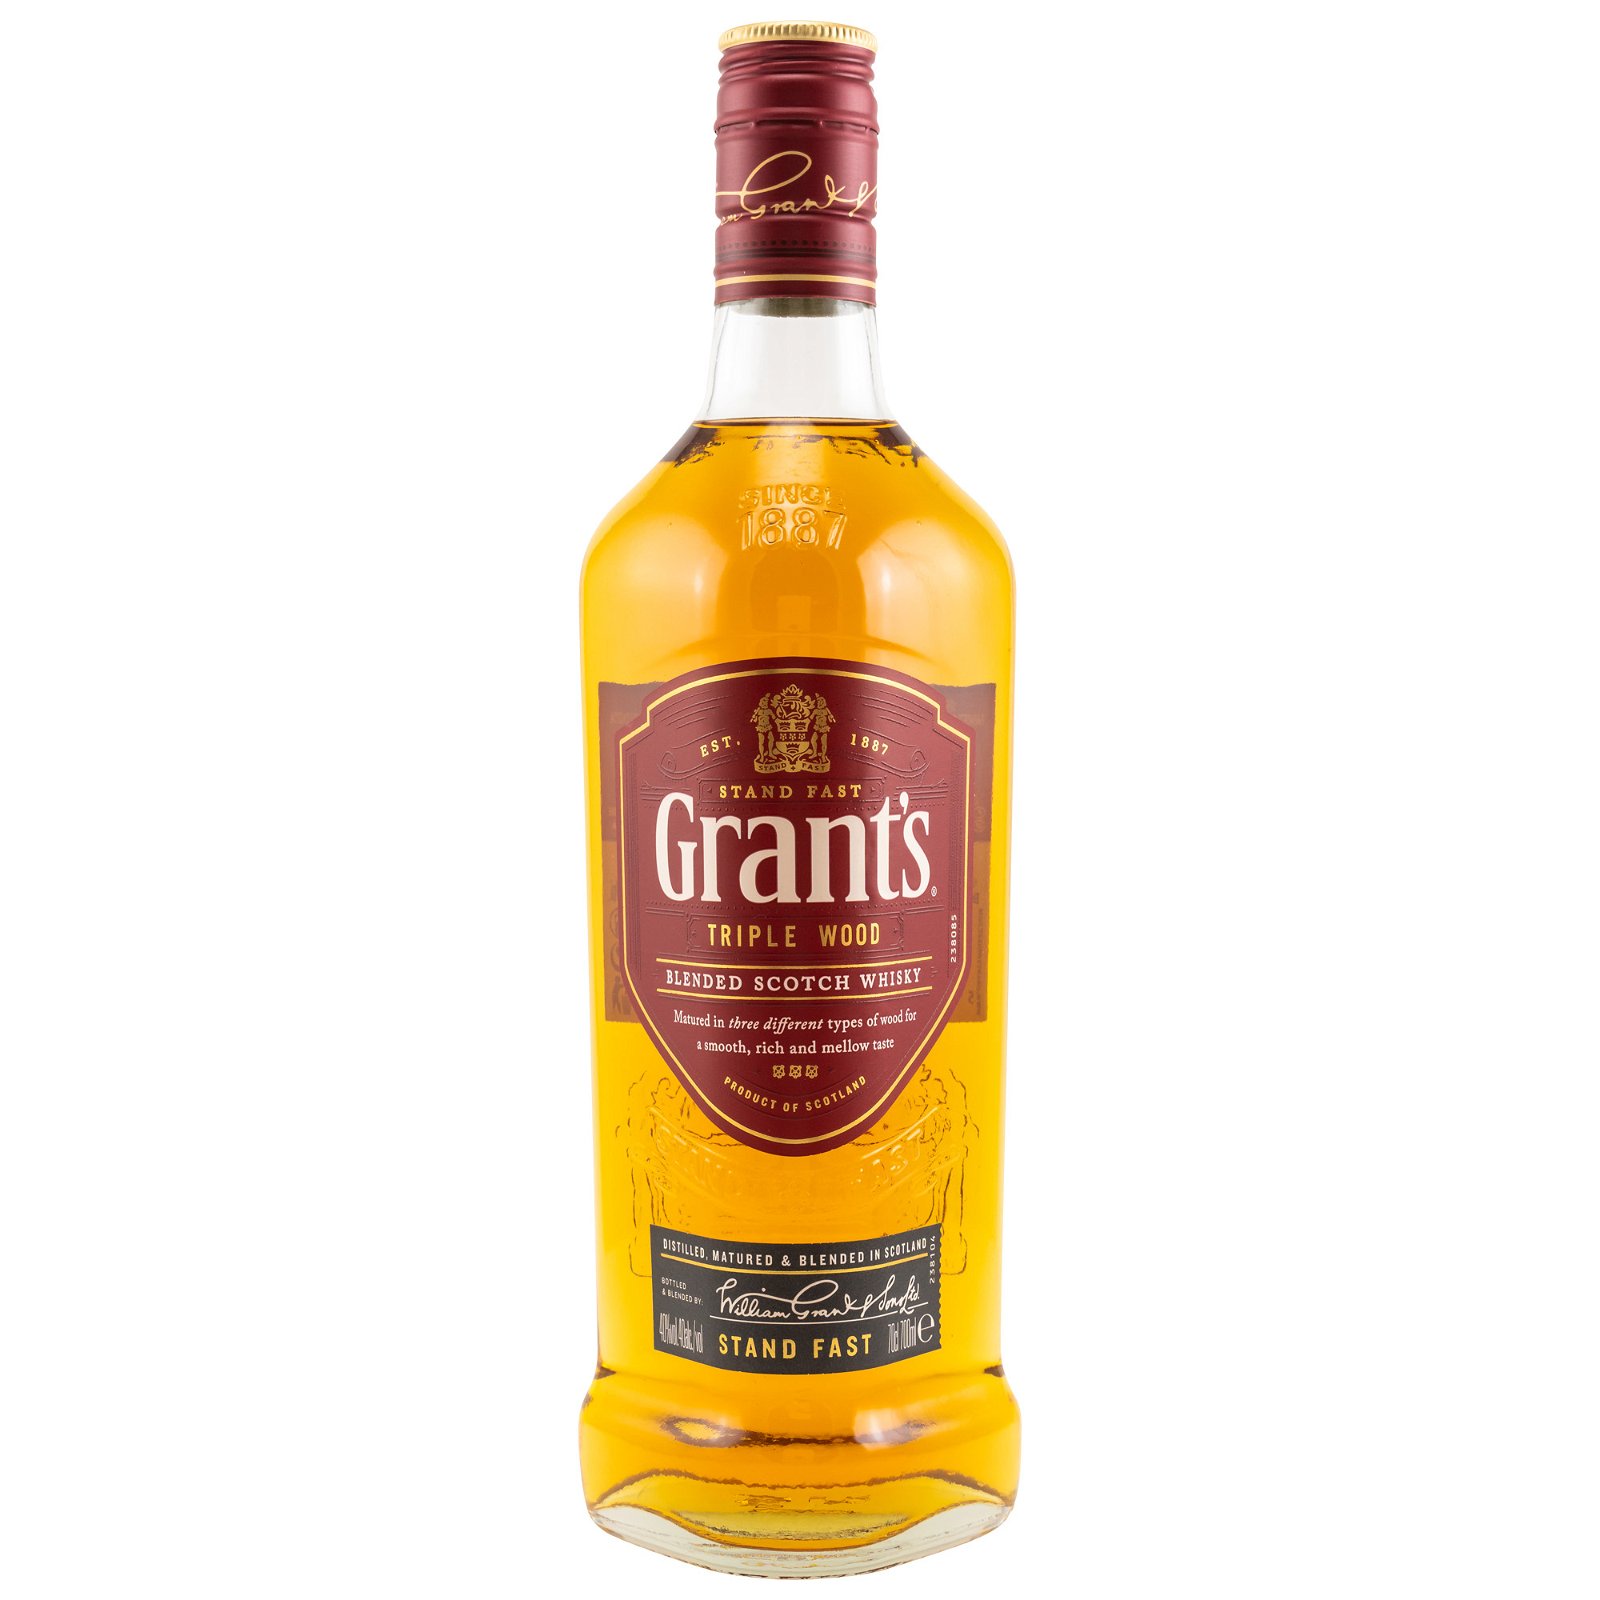 Grants Triple Wood Blended Scotch Whisky